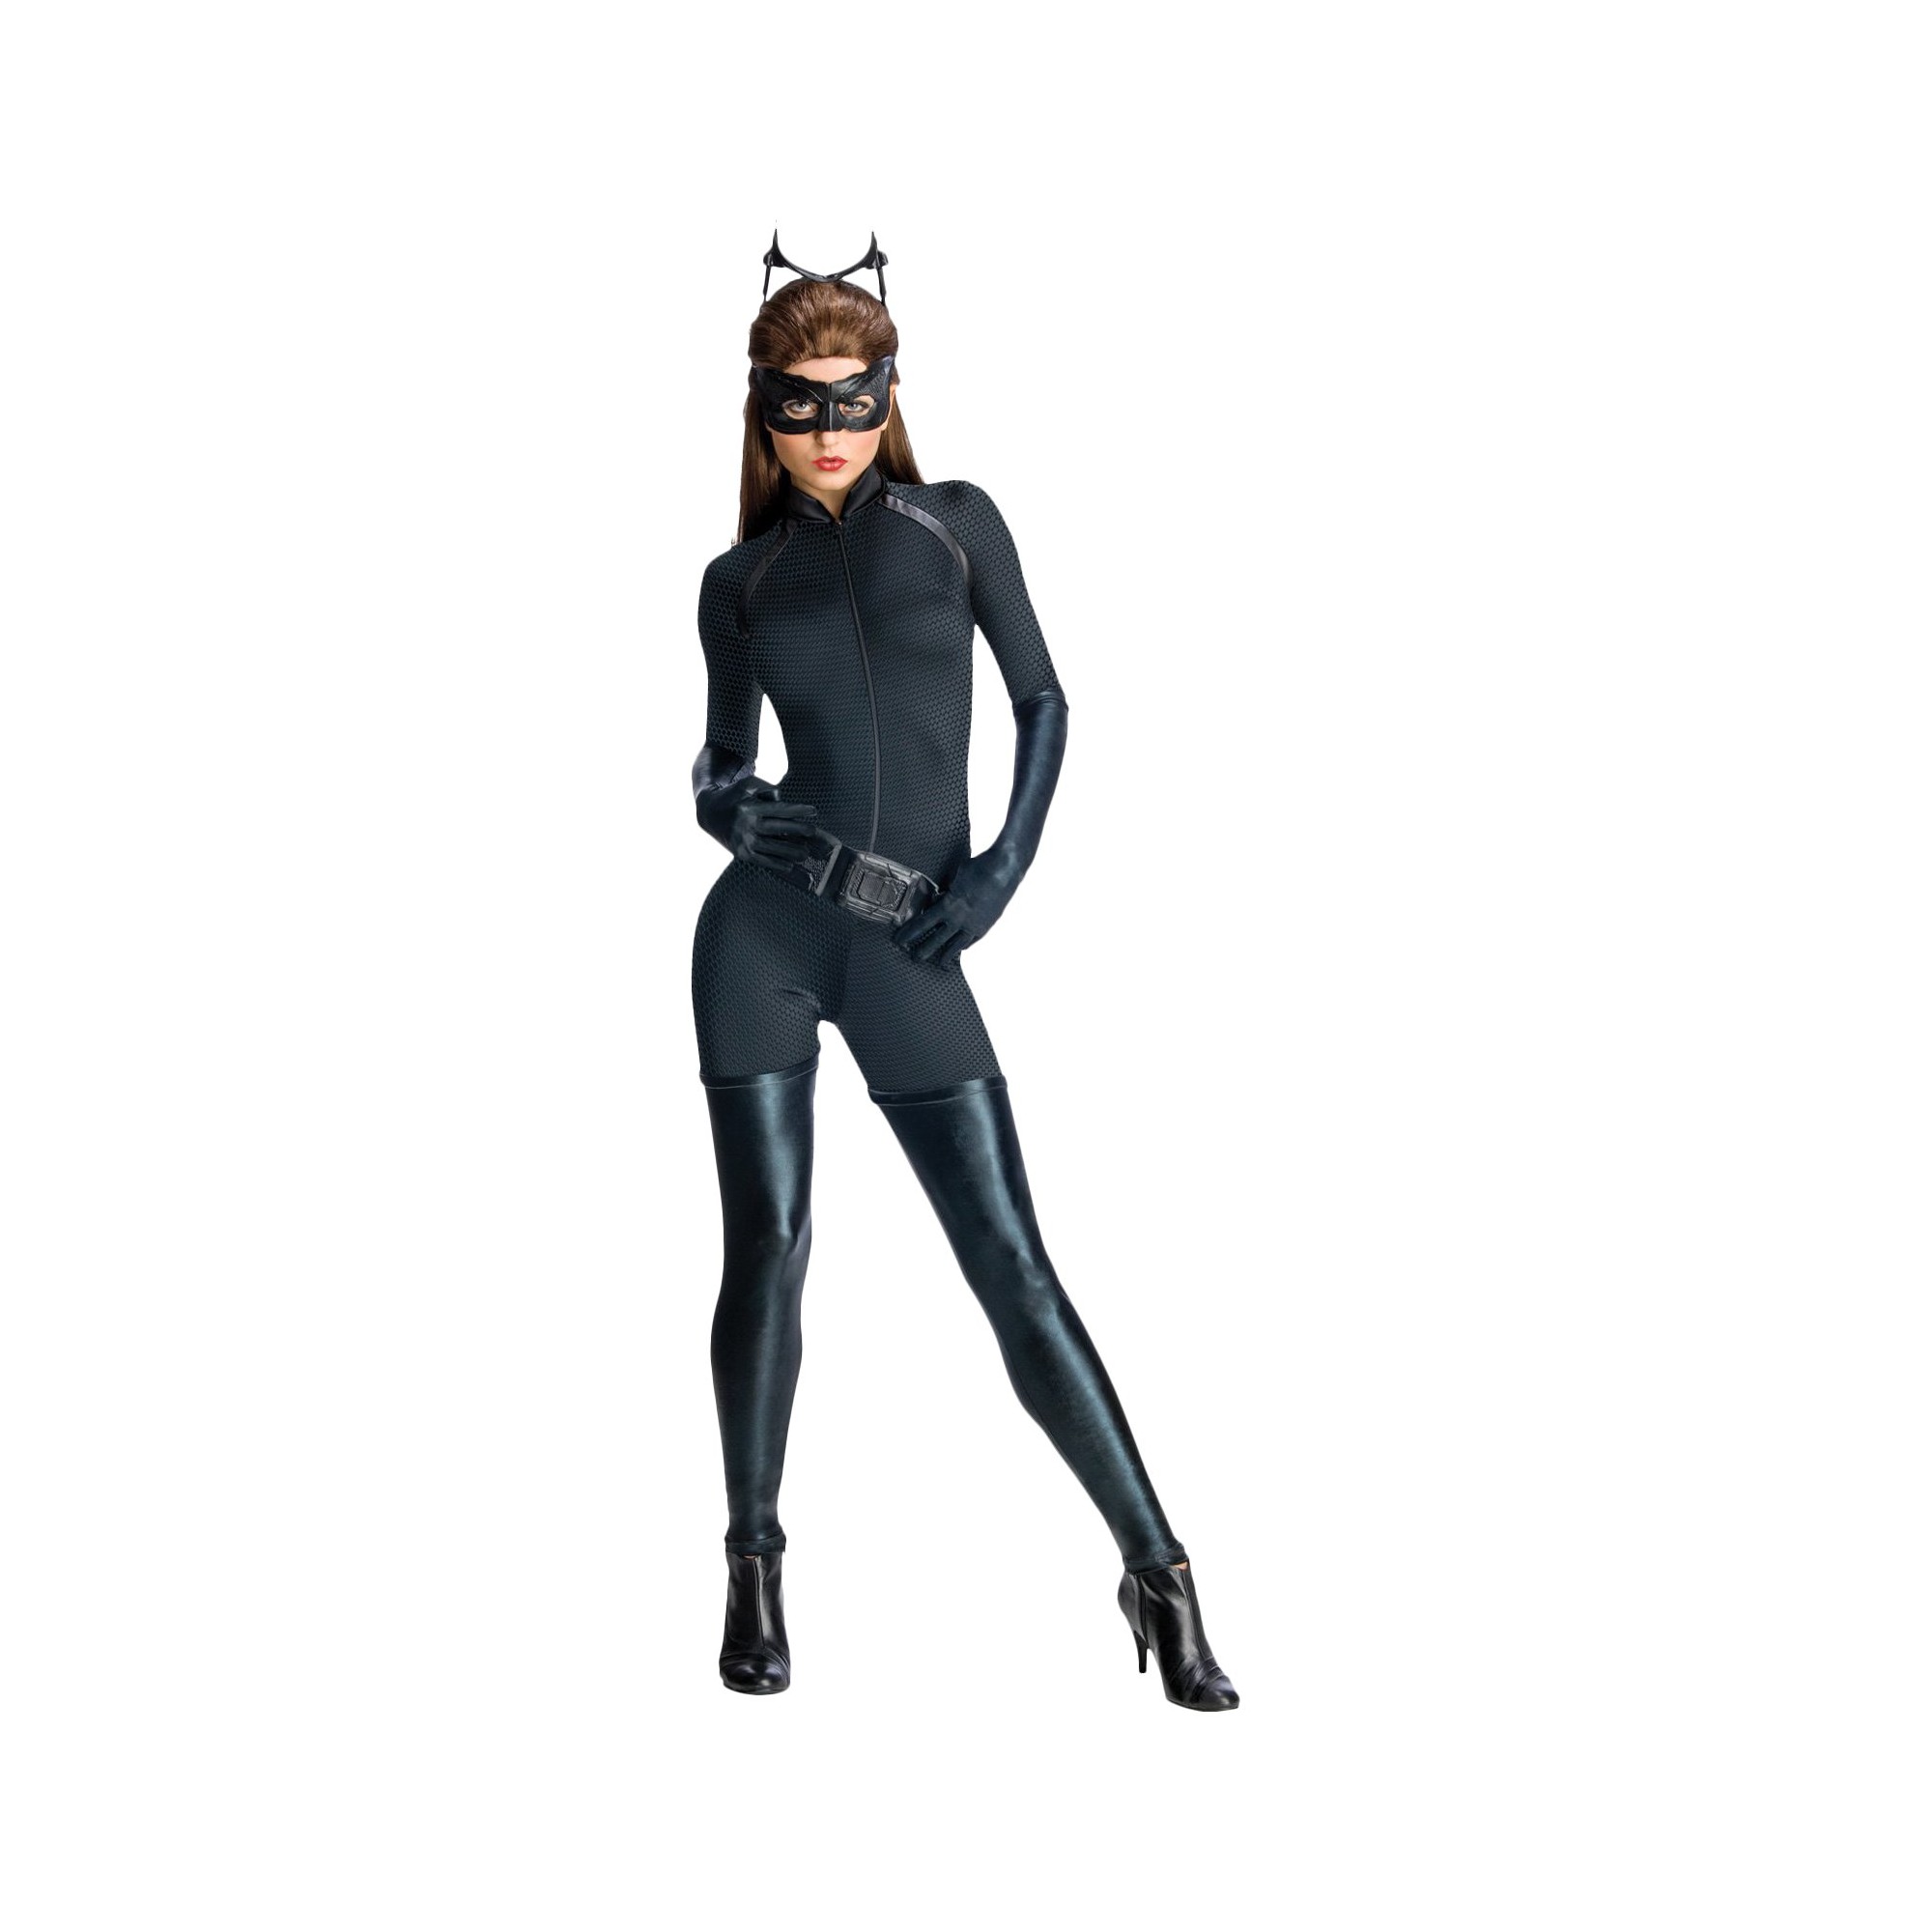 Halloween Women's The Knight Rises Catwoman Costume Black S, Size: Small